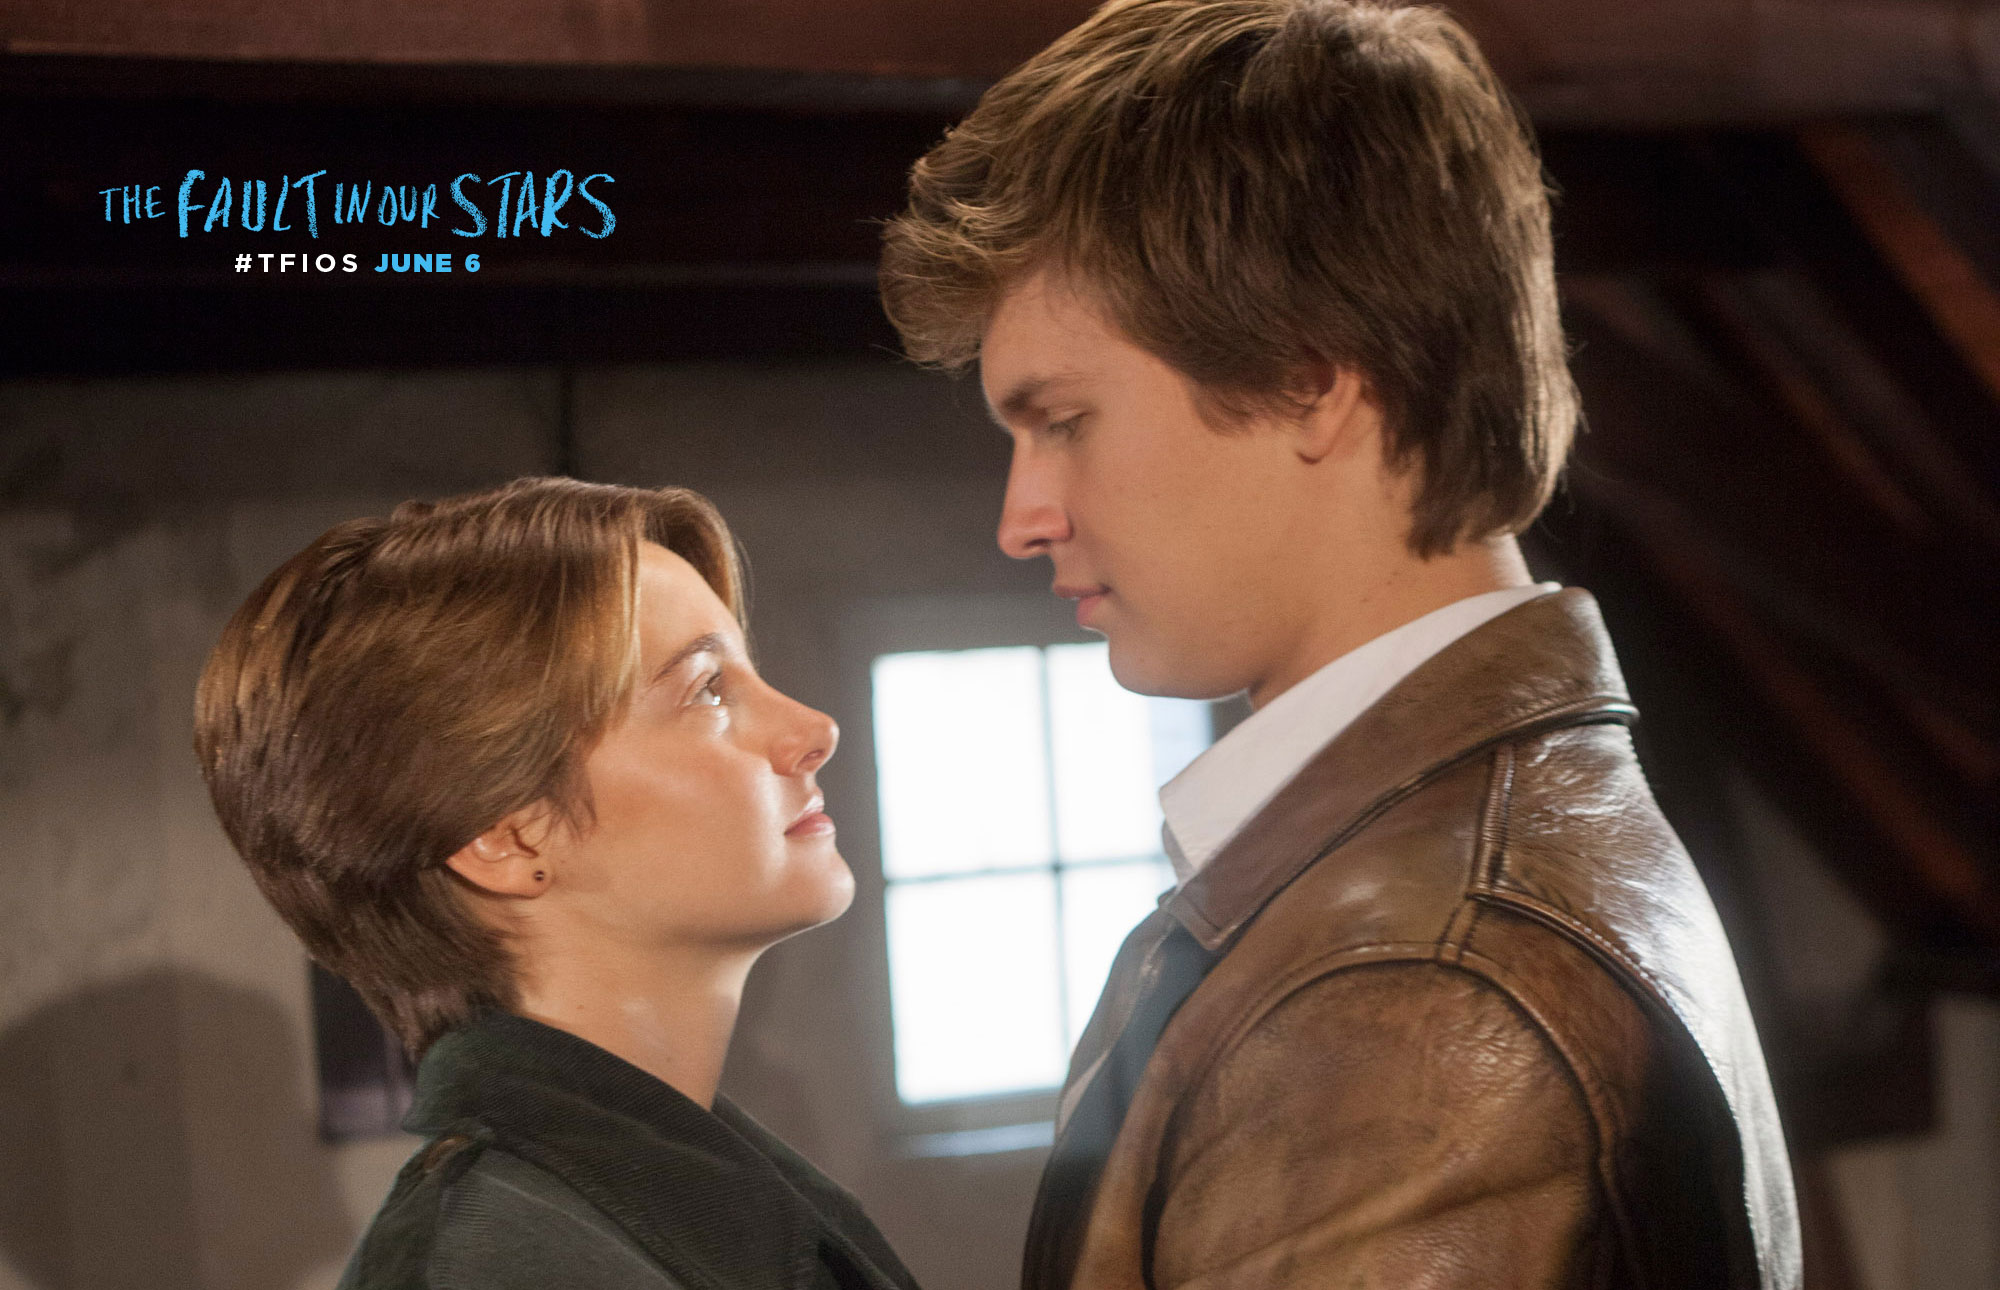 Smouldering stares between Hazel Green (Shailene Woodley) and Augustus Waters (Ansel Elgort). (The Fault in Our Stars official website)